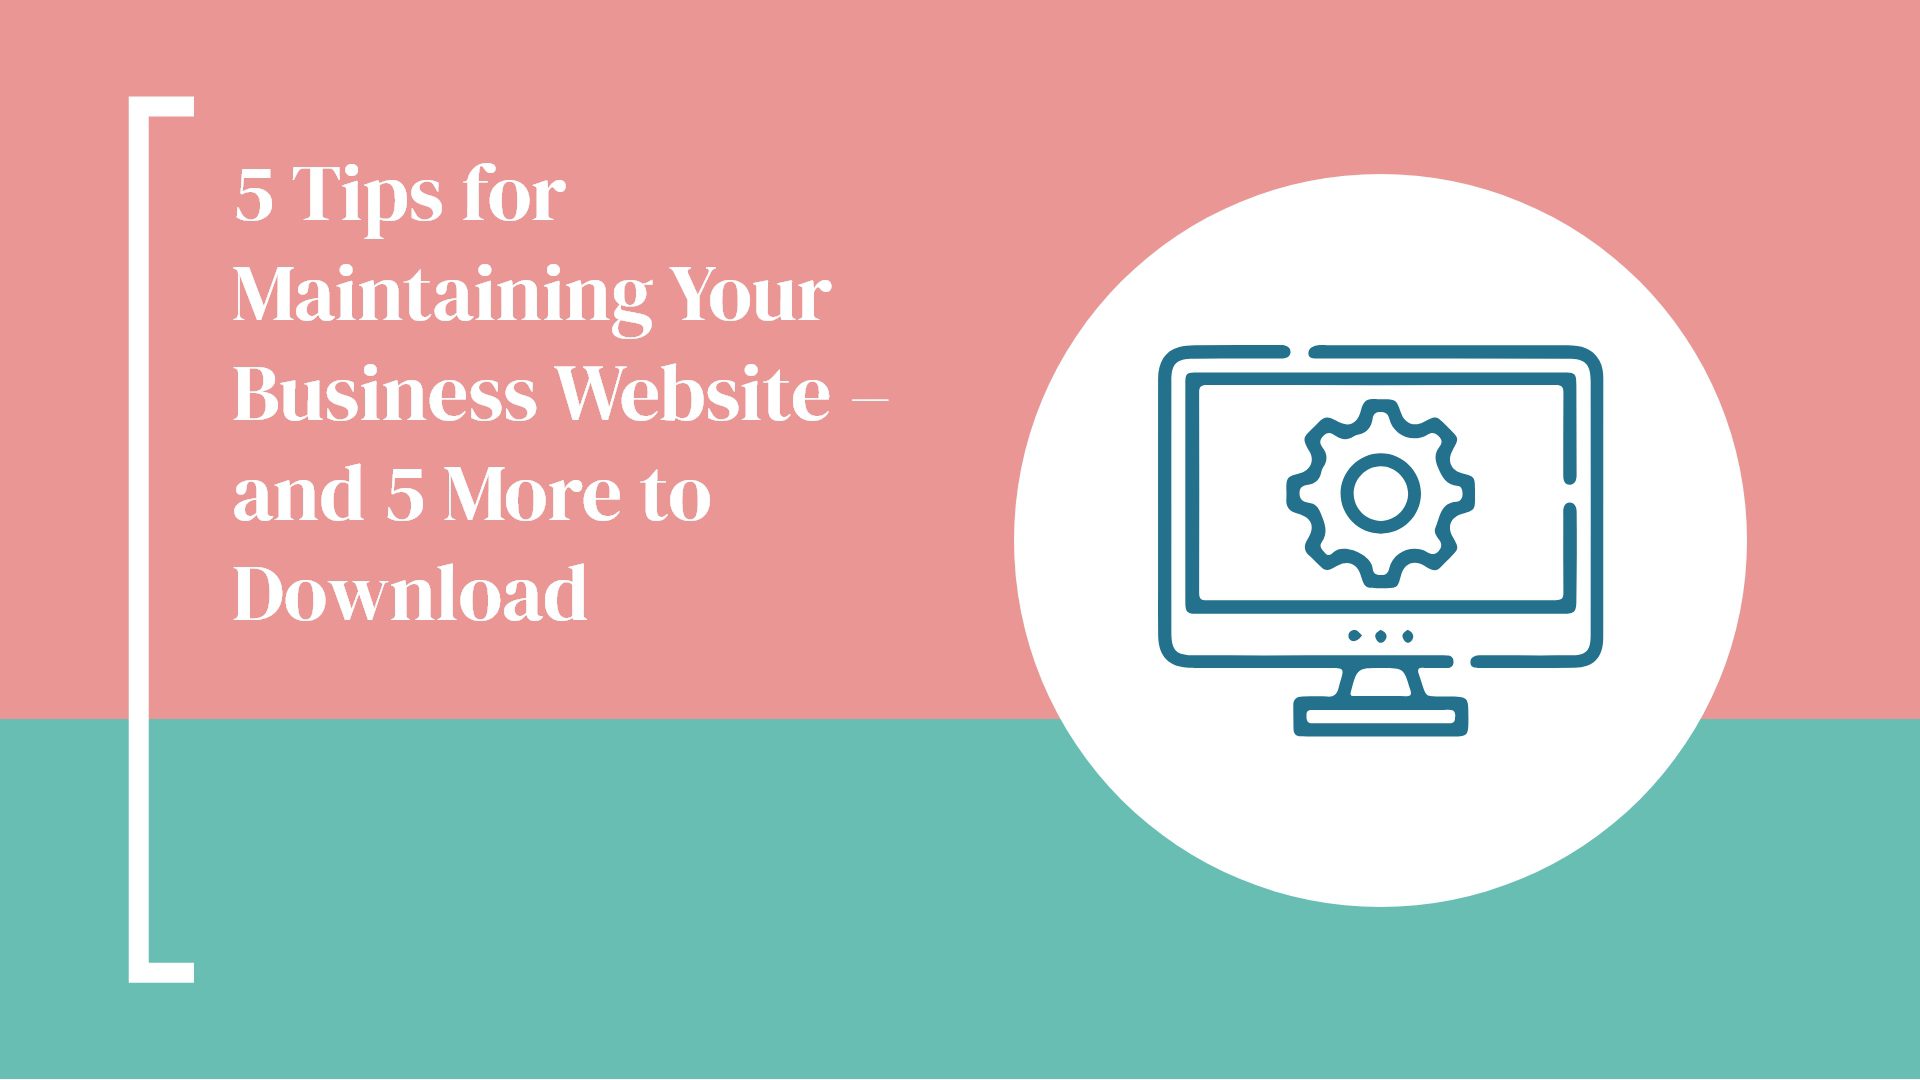 5 Tips for Maintaining Your Business Website - and 5 More to Download